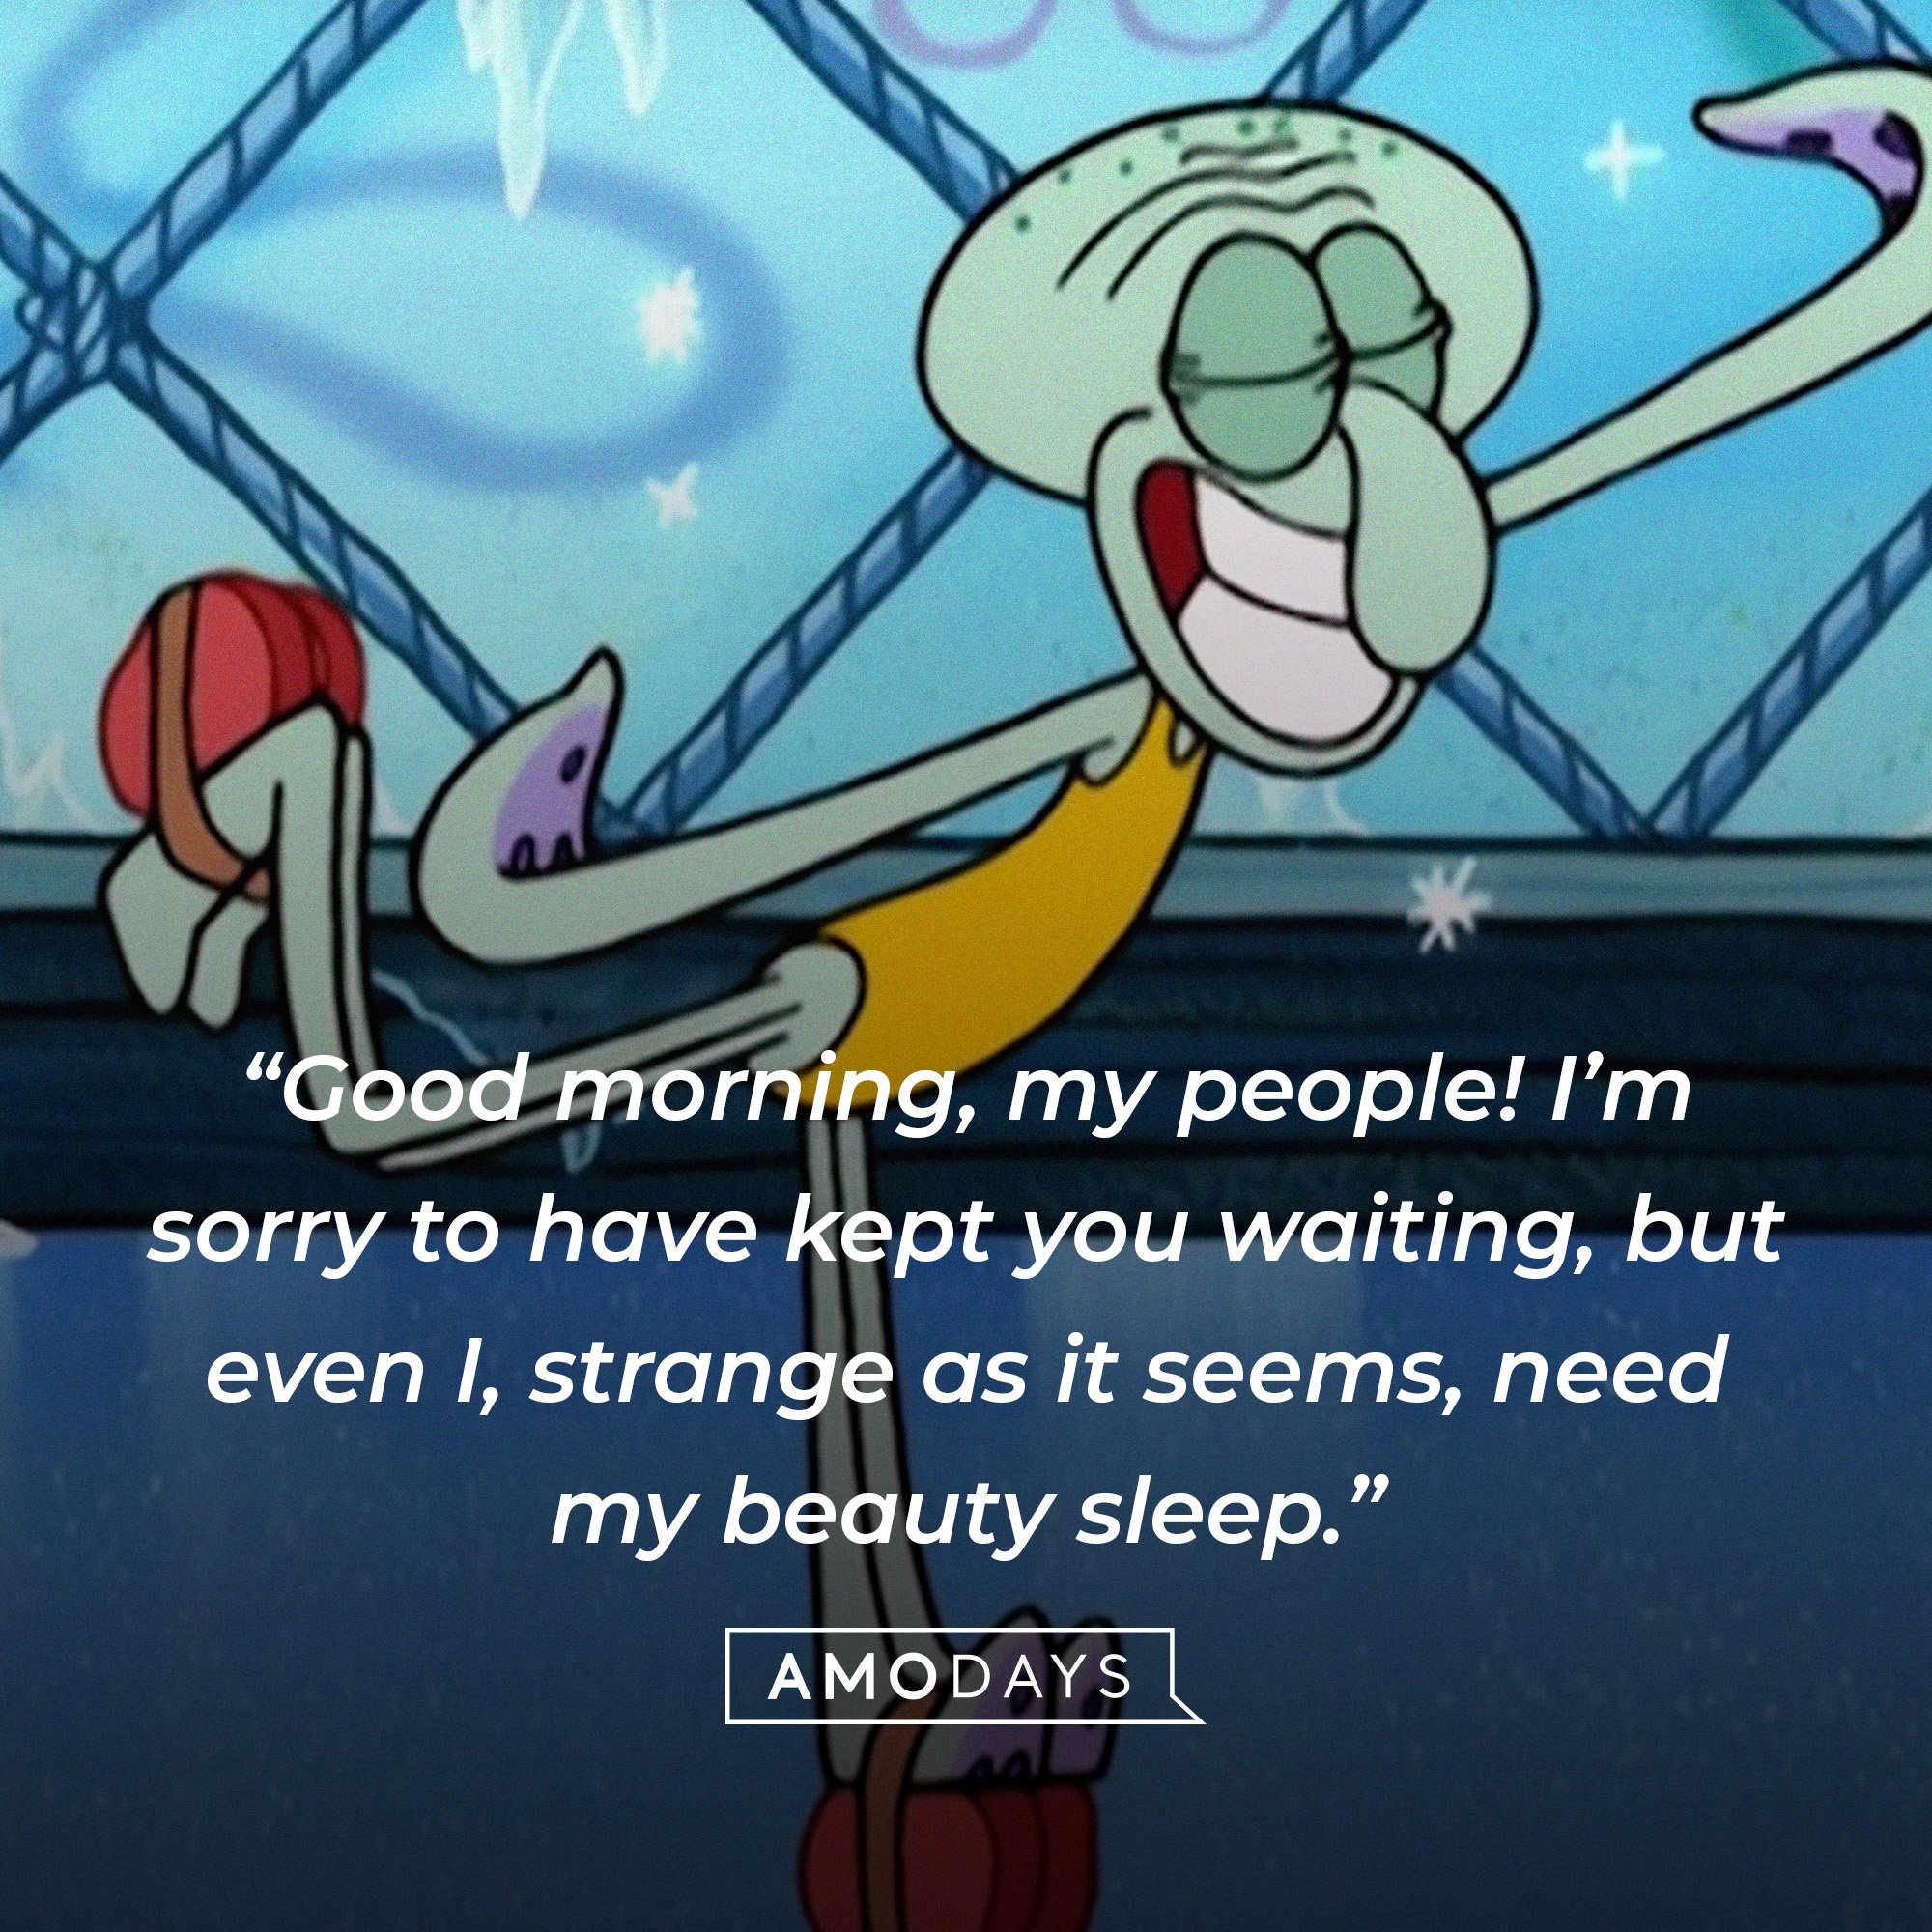 Squidward Tentacles’ quote: “Good morning, my people! I’m sorry to have kept you waiting, but even I, strange as it seems, need my beauty sleep.” | Source: AmoDays